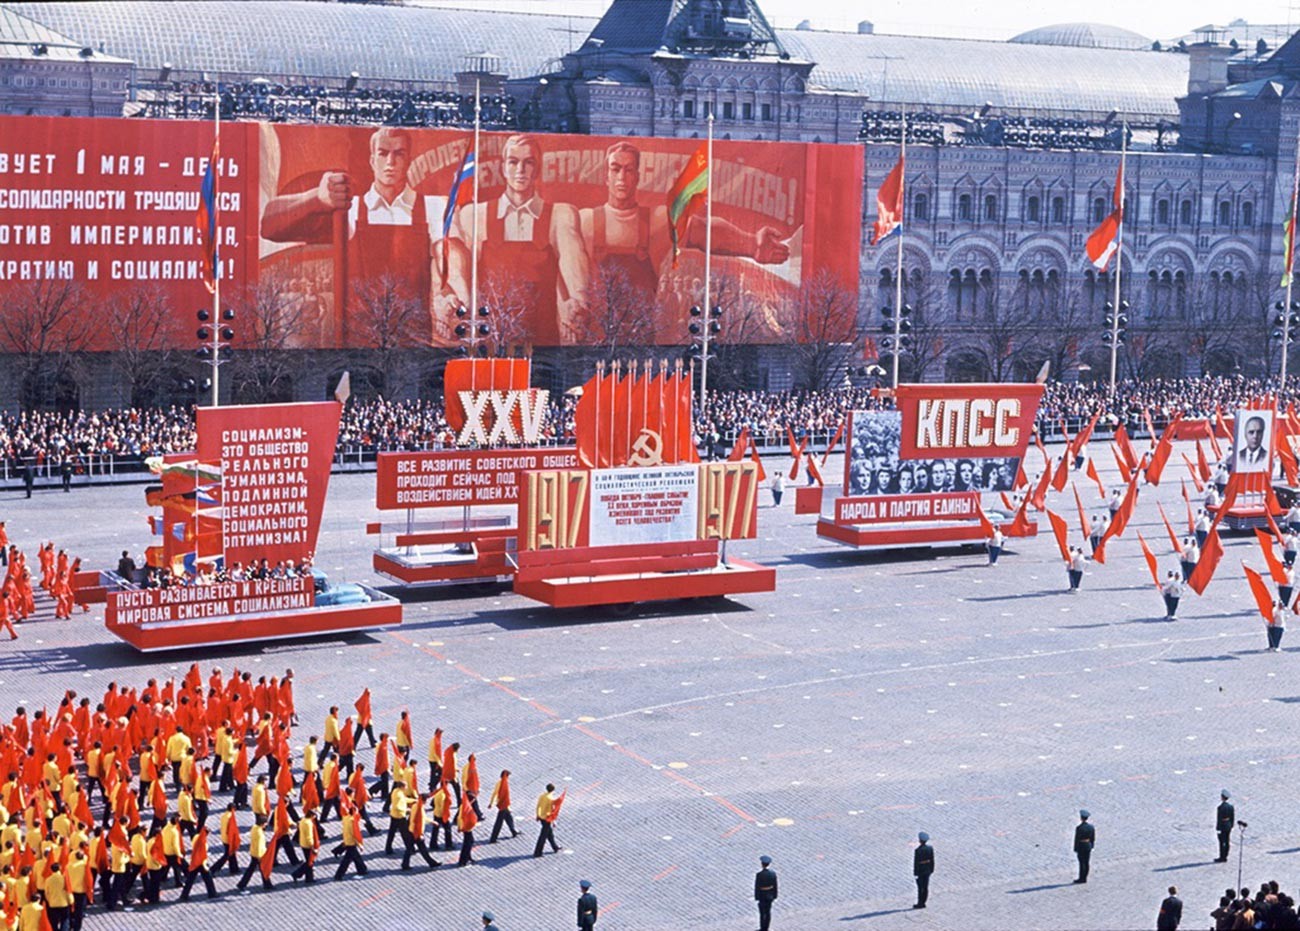 May 1 parade on Red Square, 1976